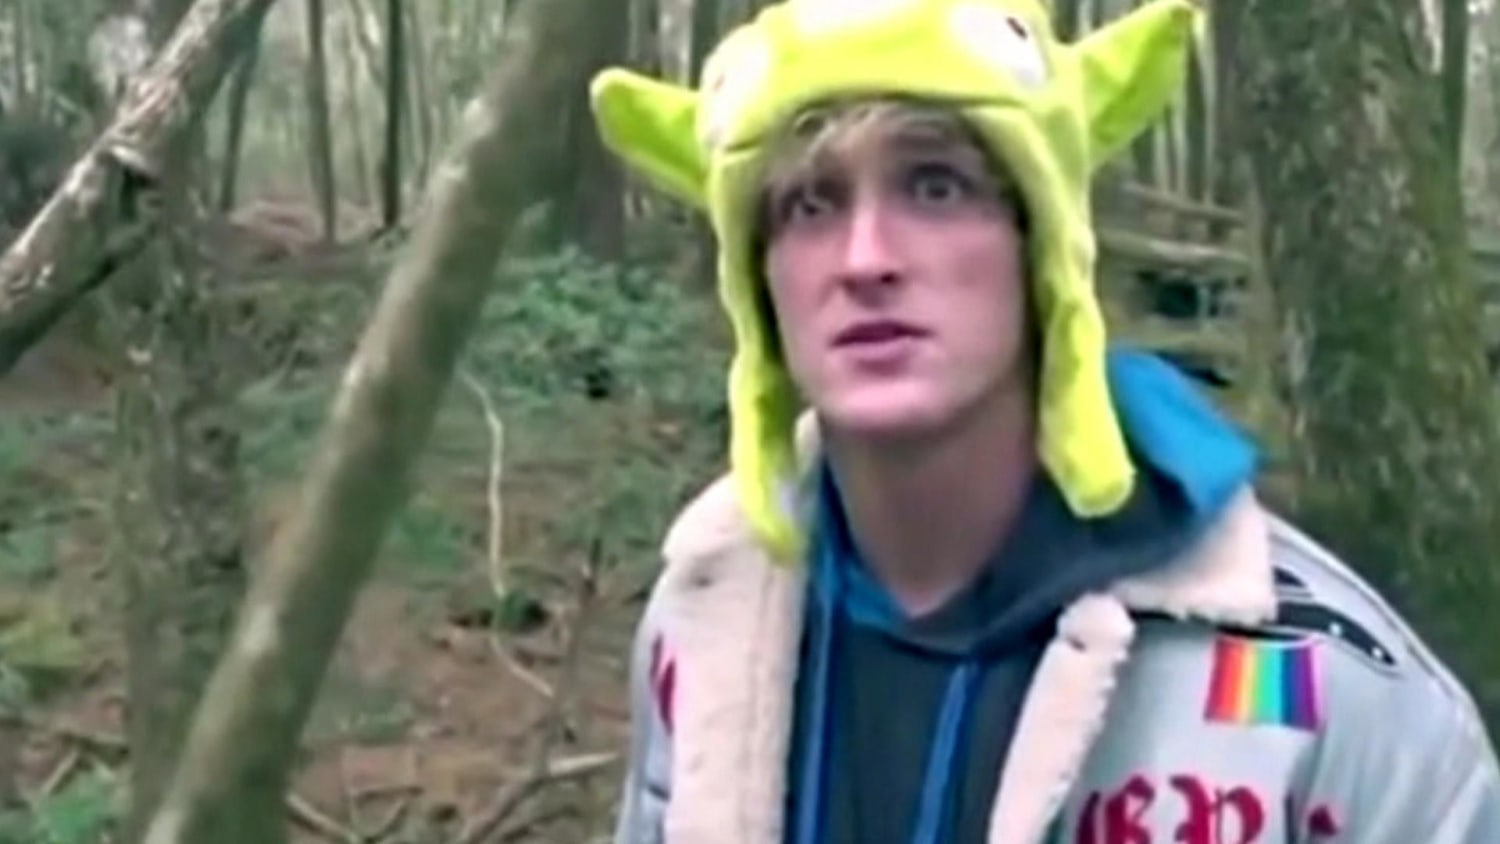 YouTube star Logan Paul apologizes for video appearing to show suicide victim